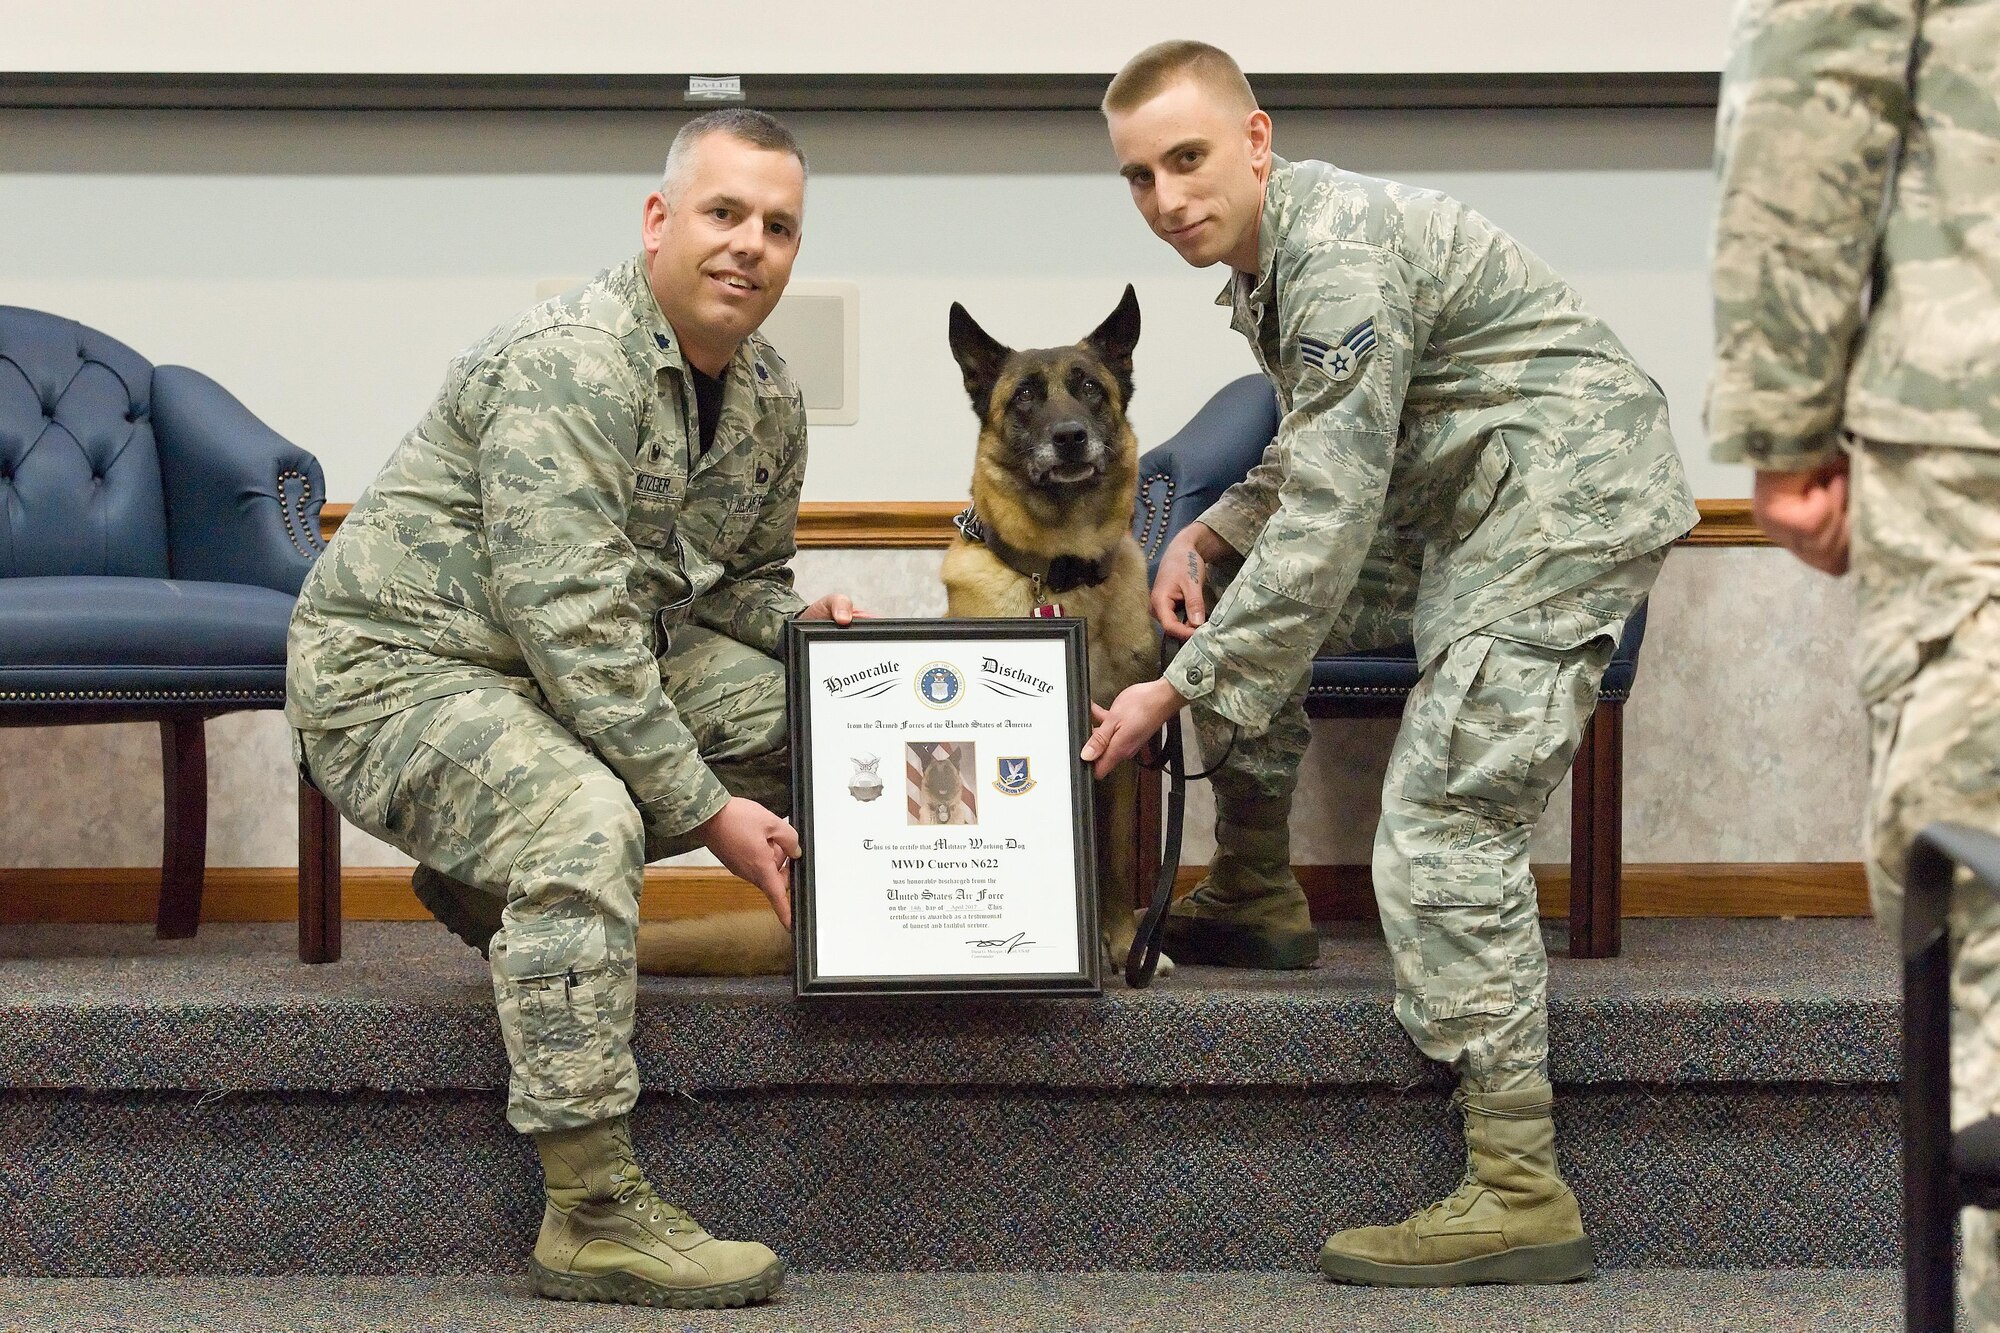 Lt. Col. Dana Metzger, 436th Security Forces Squadron commander and Senior Airman Alexander Cormier, 436th SFS Military Working Dog handler, present MWD Cuervo, N622, with his Honorable Discharge from active duty April 14, 2017, on Dover Air Force Base, Del. Cuervo was also presented the U.S. Air Force Meritorious Service Medal and Certificate of Retirement during the ceremony. (U.S. Air Force photo by Roland Balik)